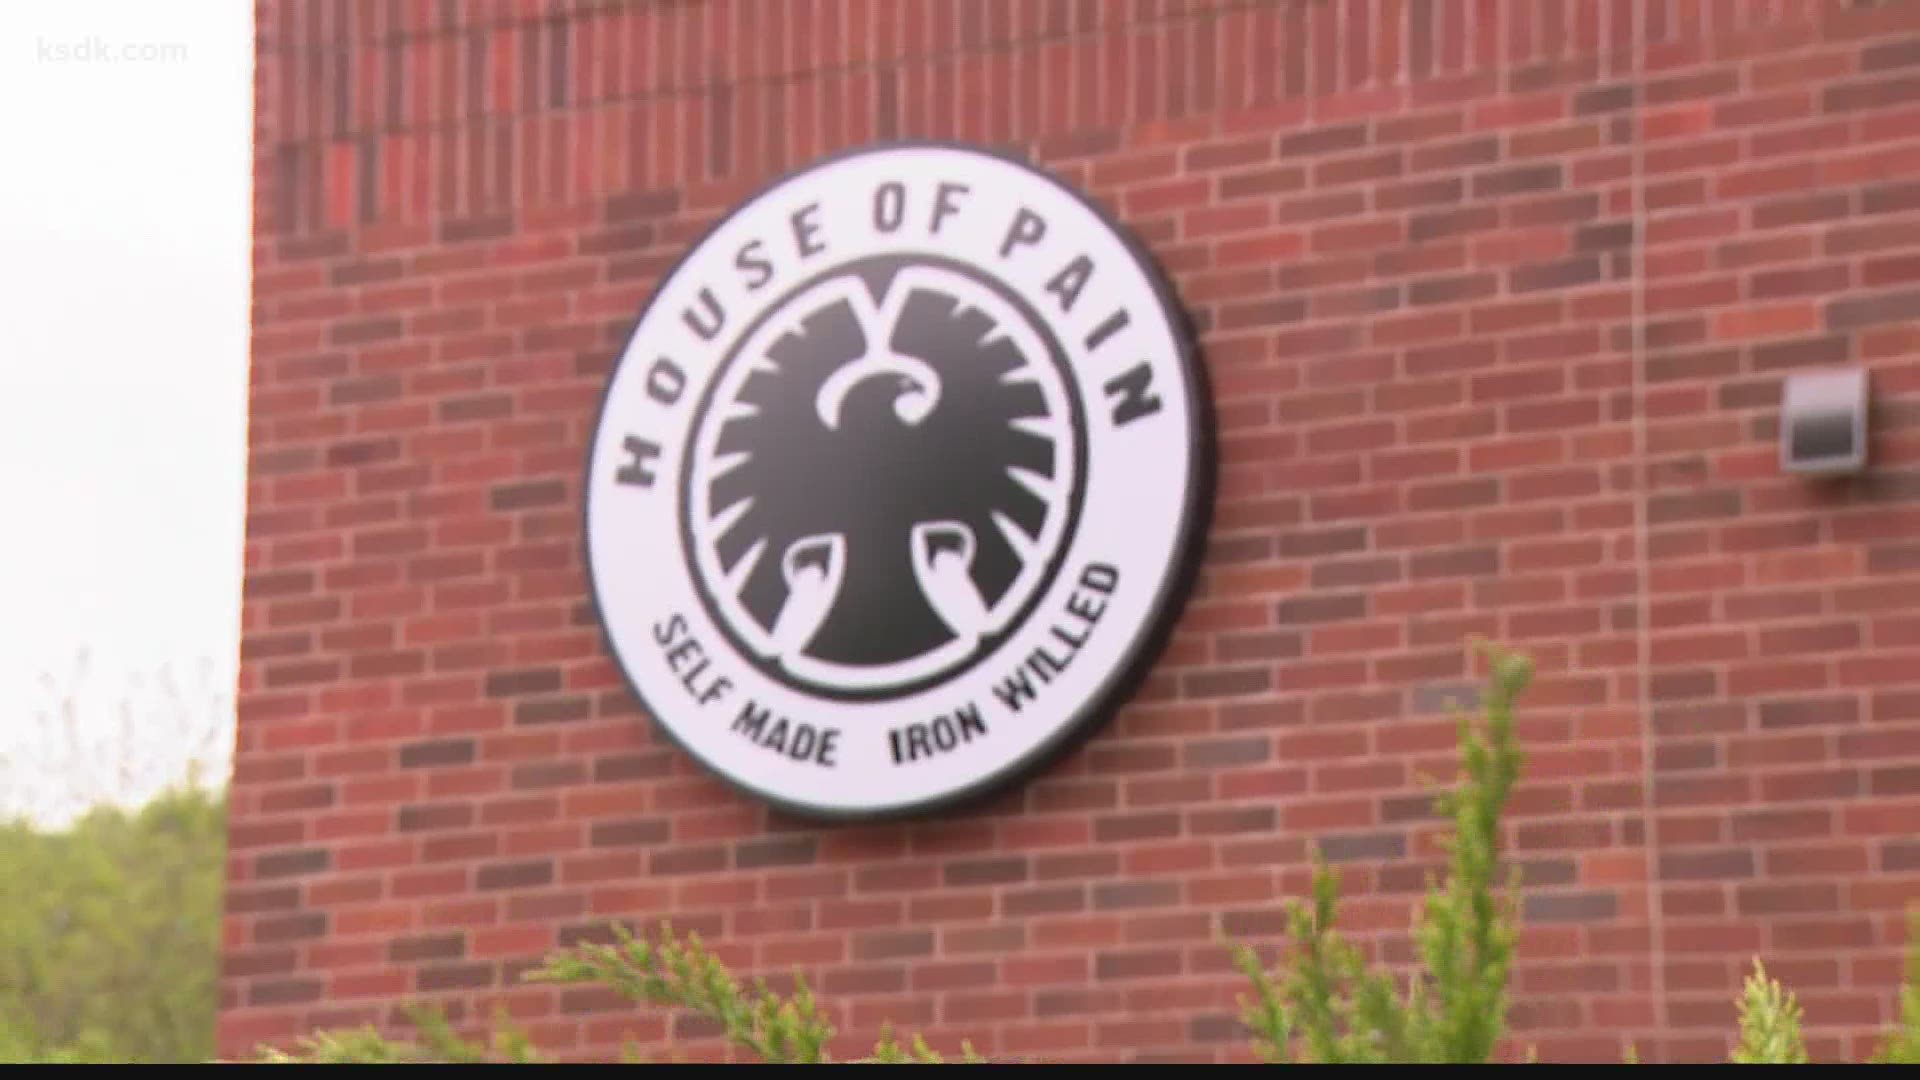 House of Pain's locations in Chesterfield and Maryland Heights both opened May 4